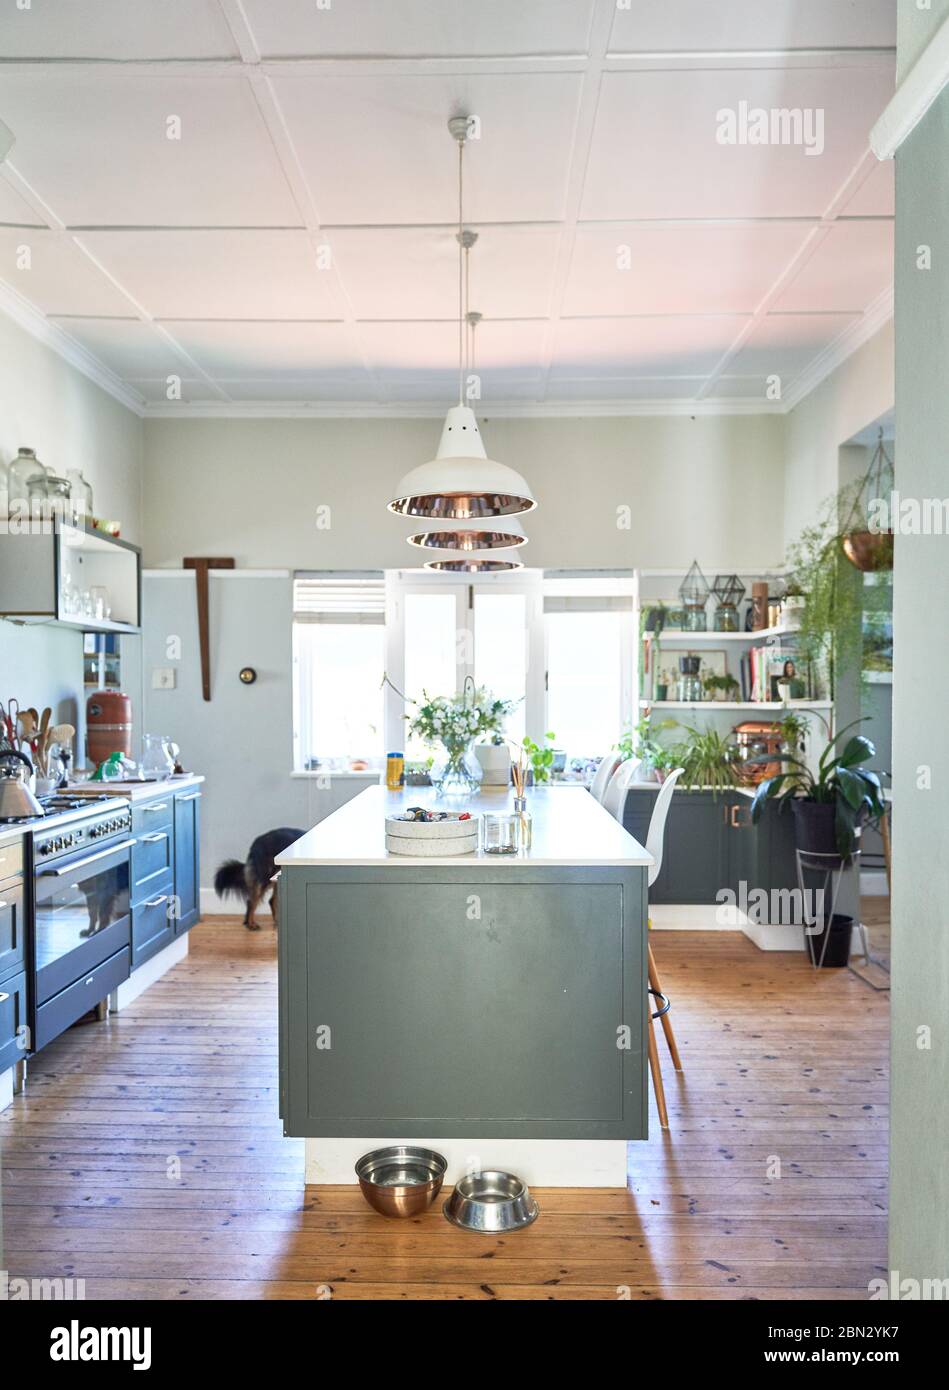 Kitchen with kitchen island and dog bowls Stock Photo